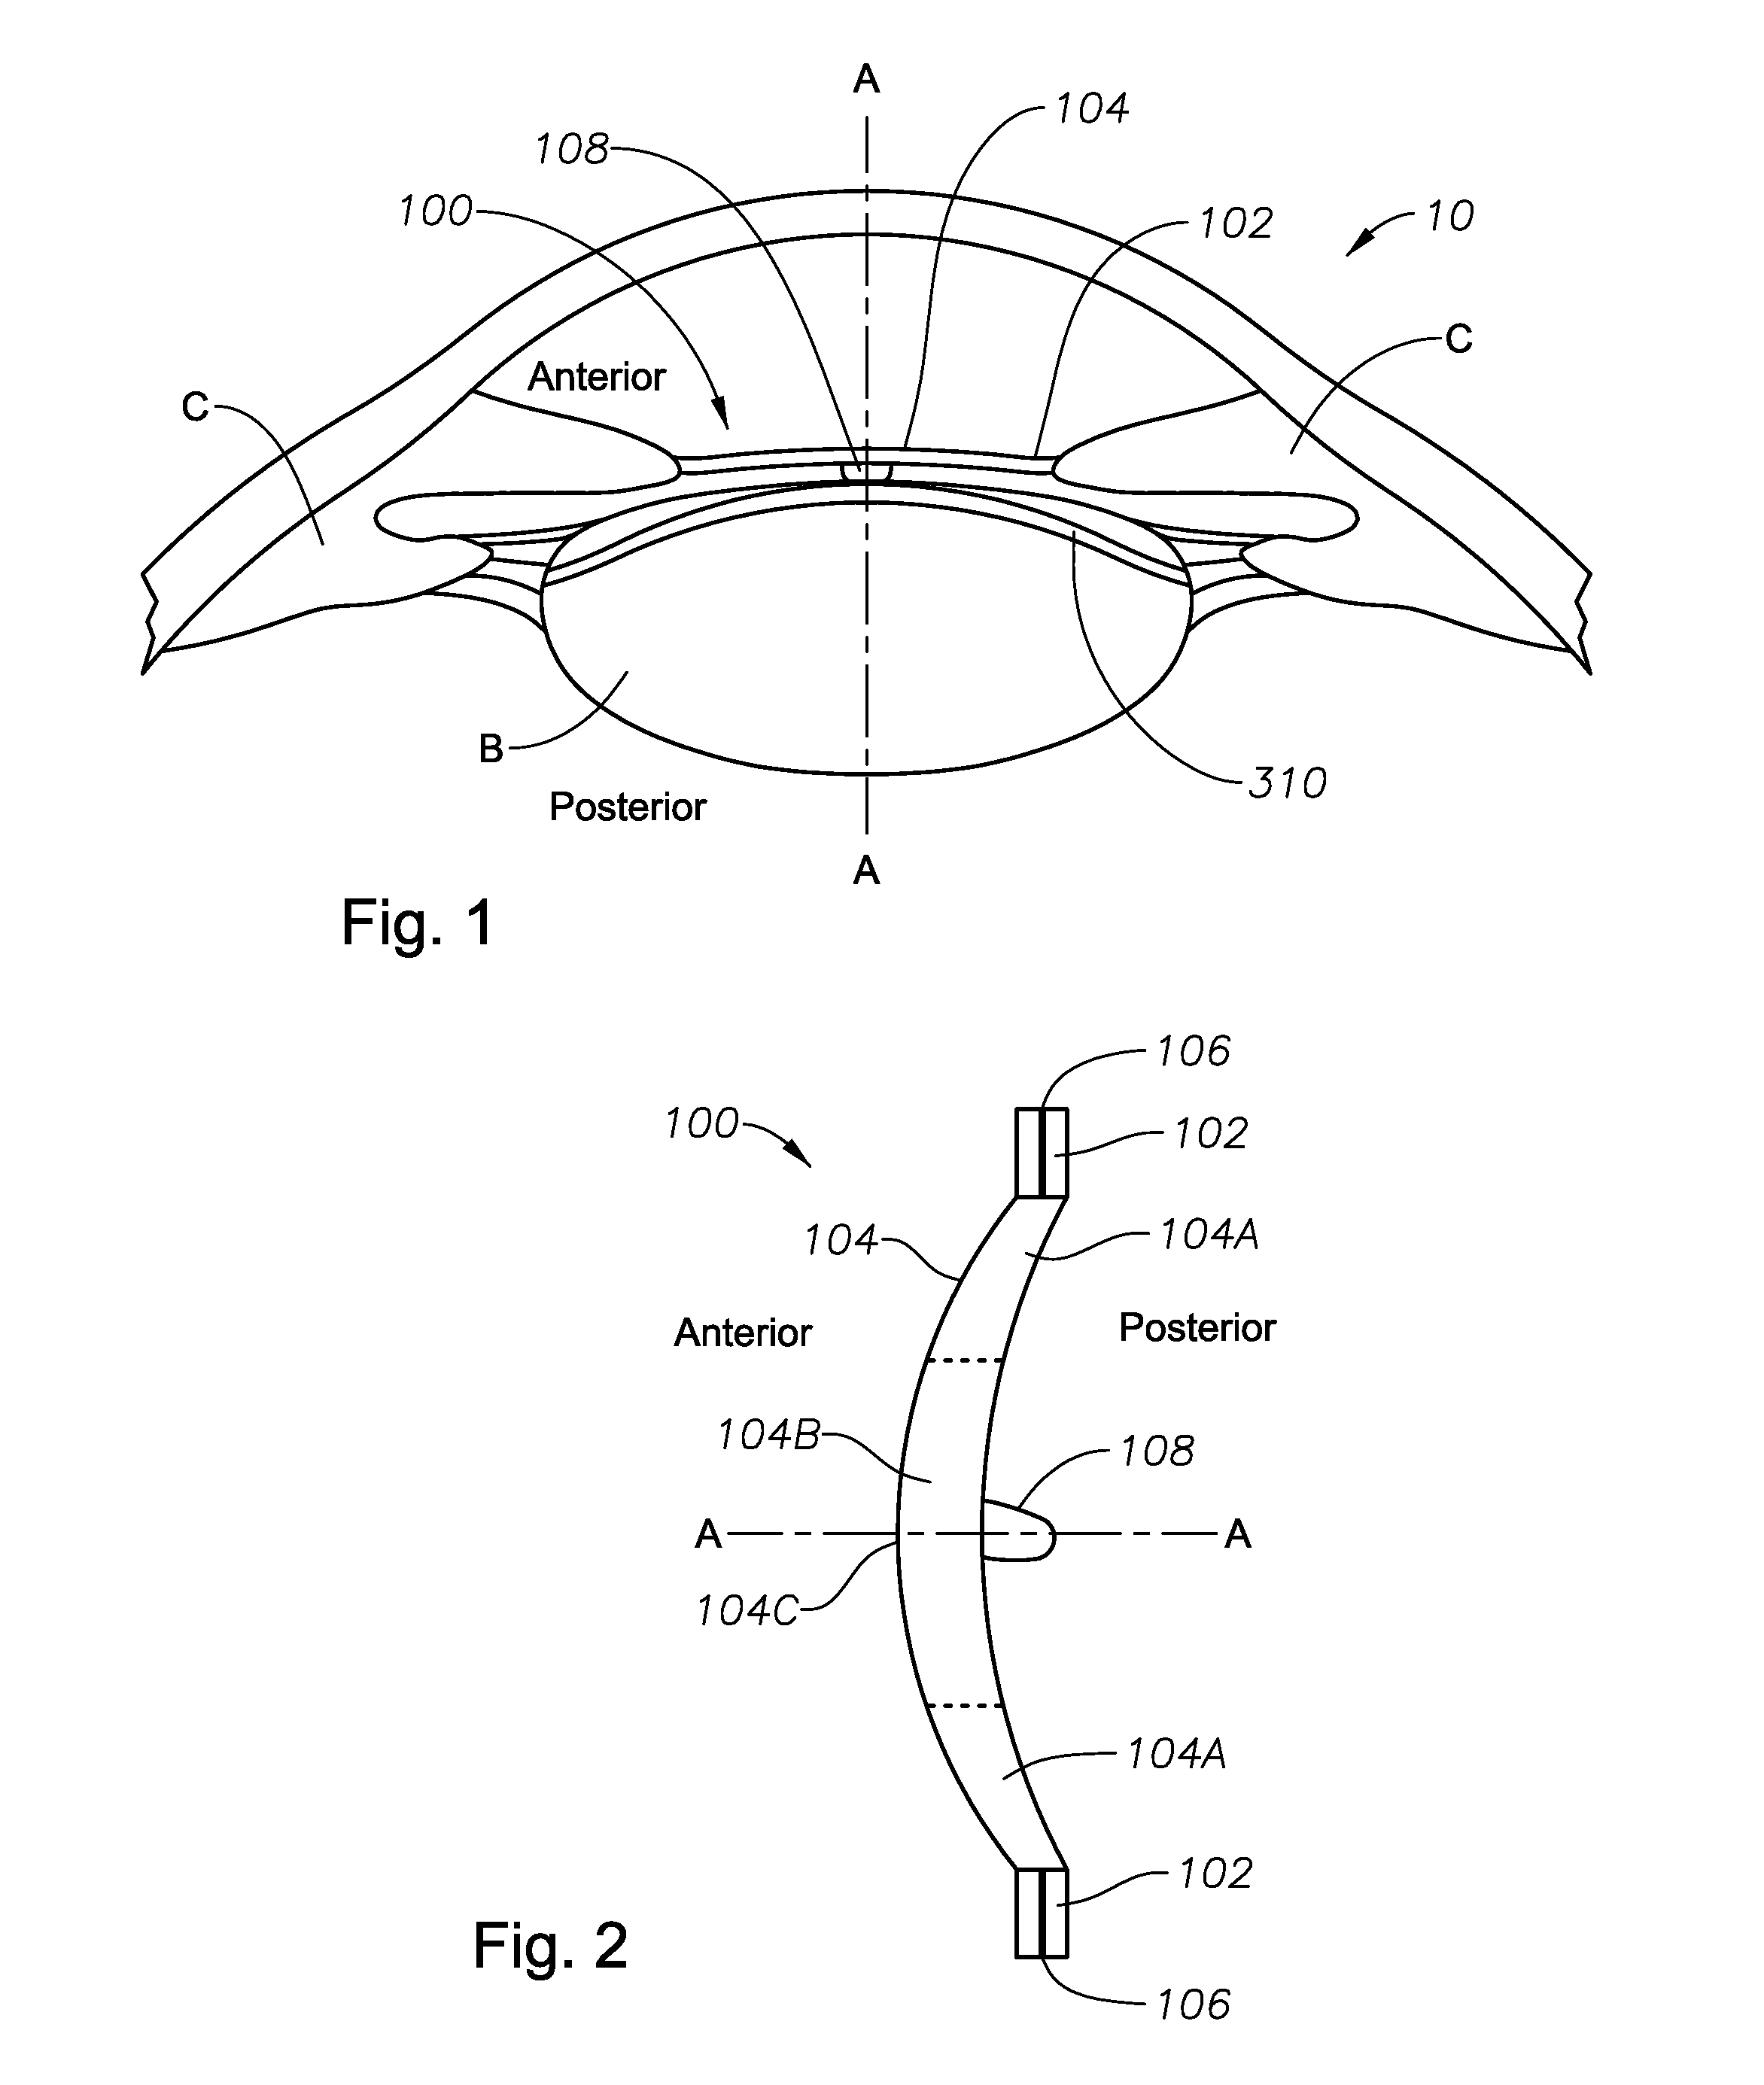 Accommodating intraocular lens with ciliary body activation